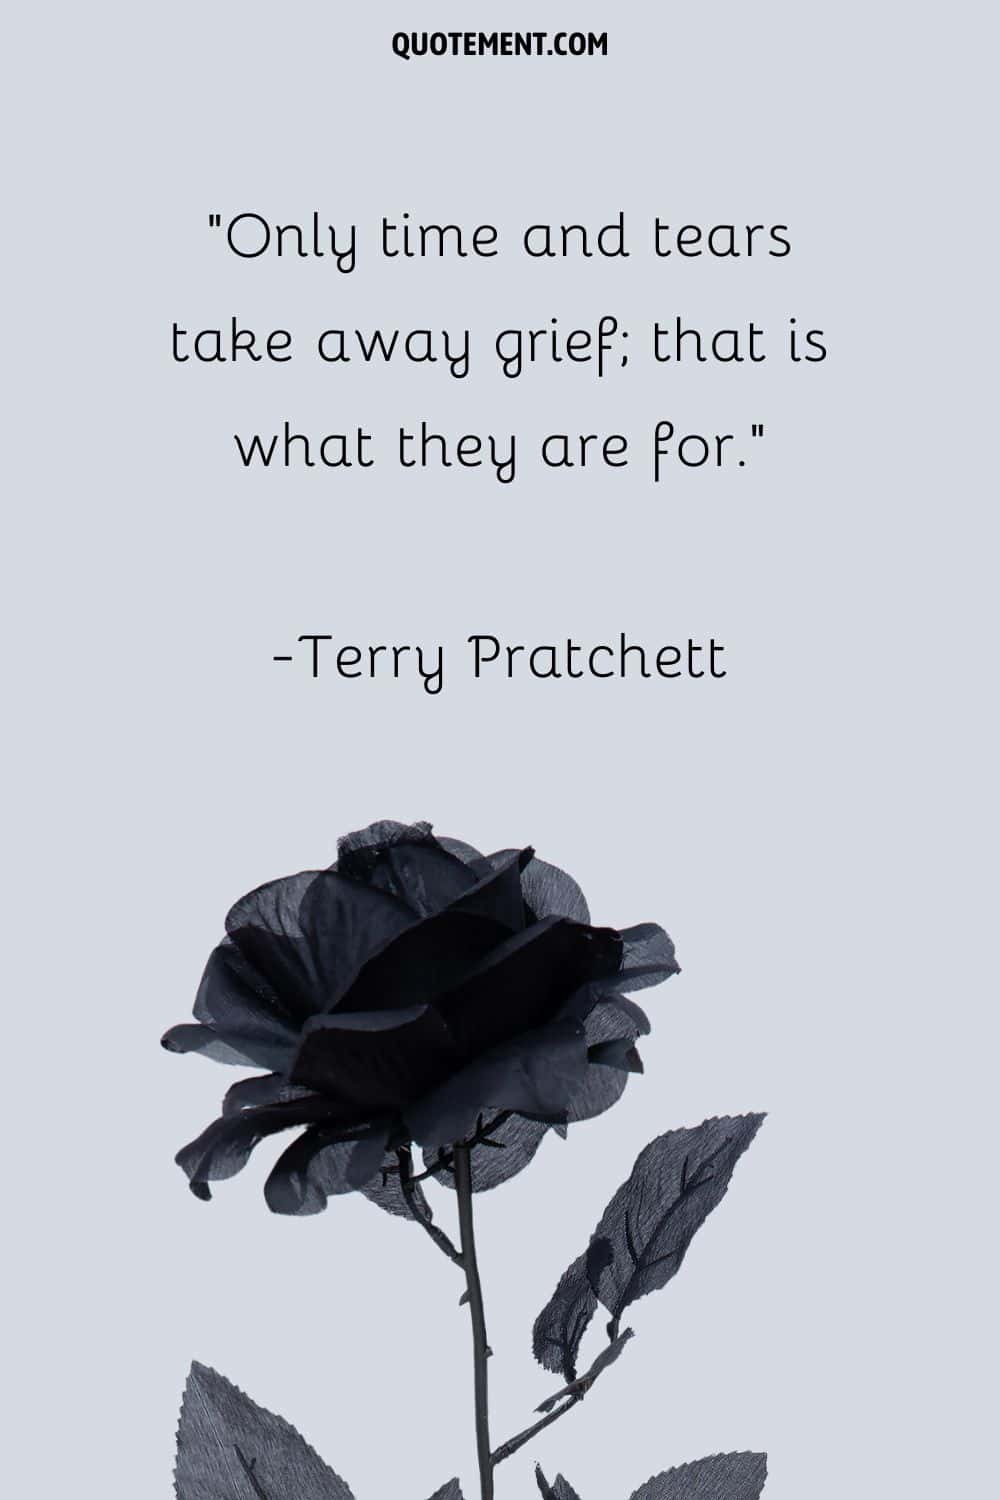 Only time and tears take away grief; that is what they are for